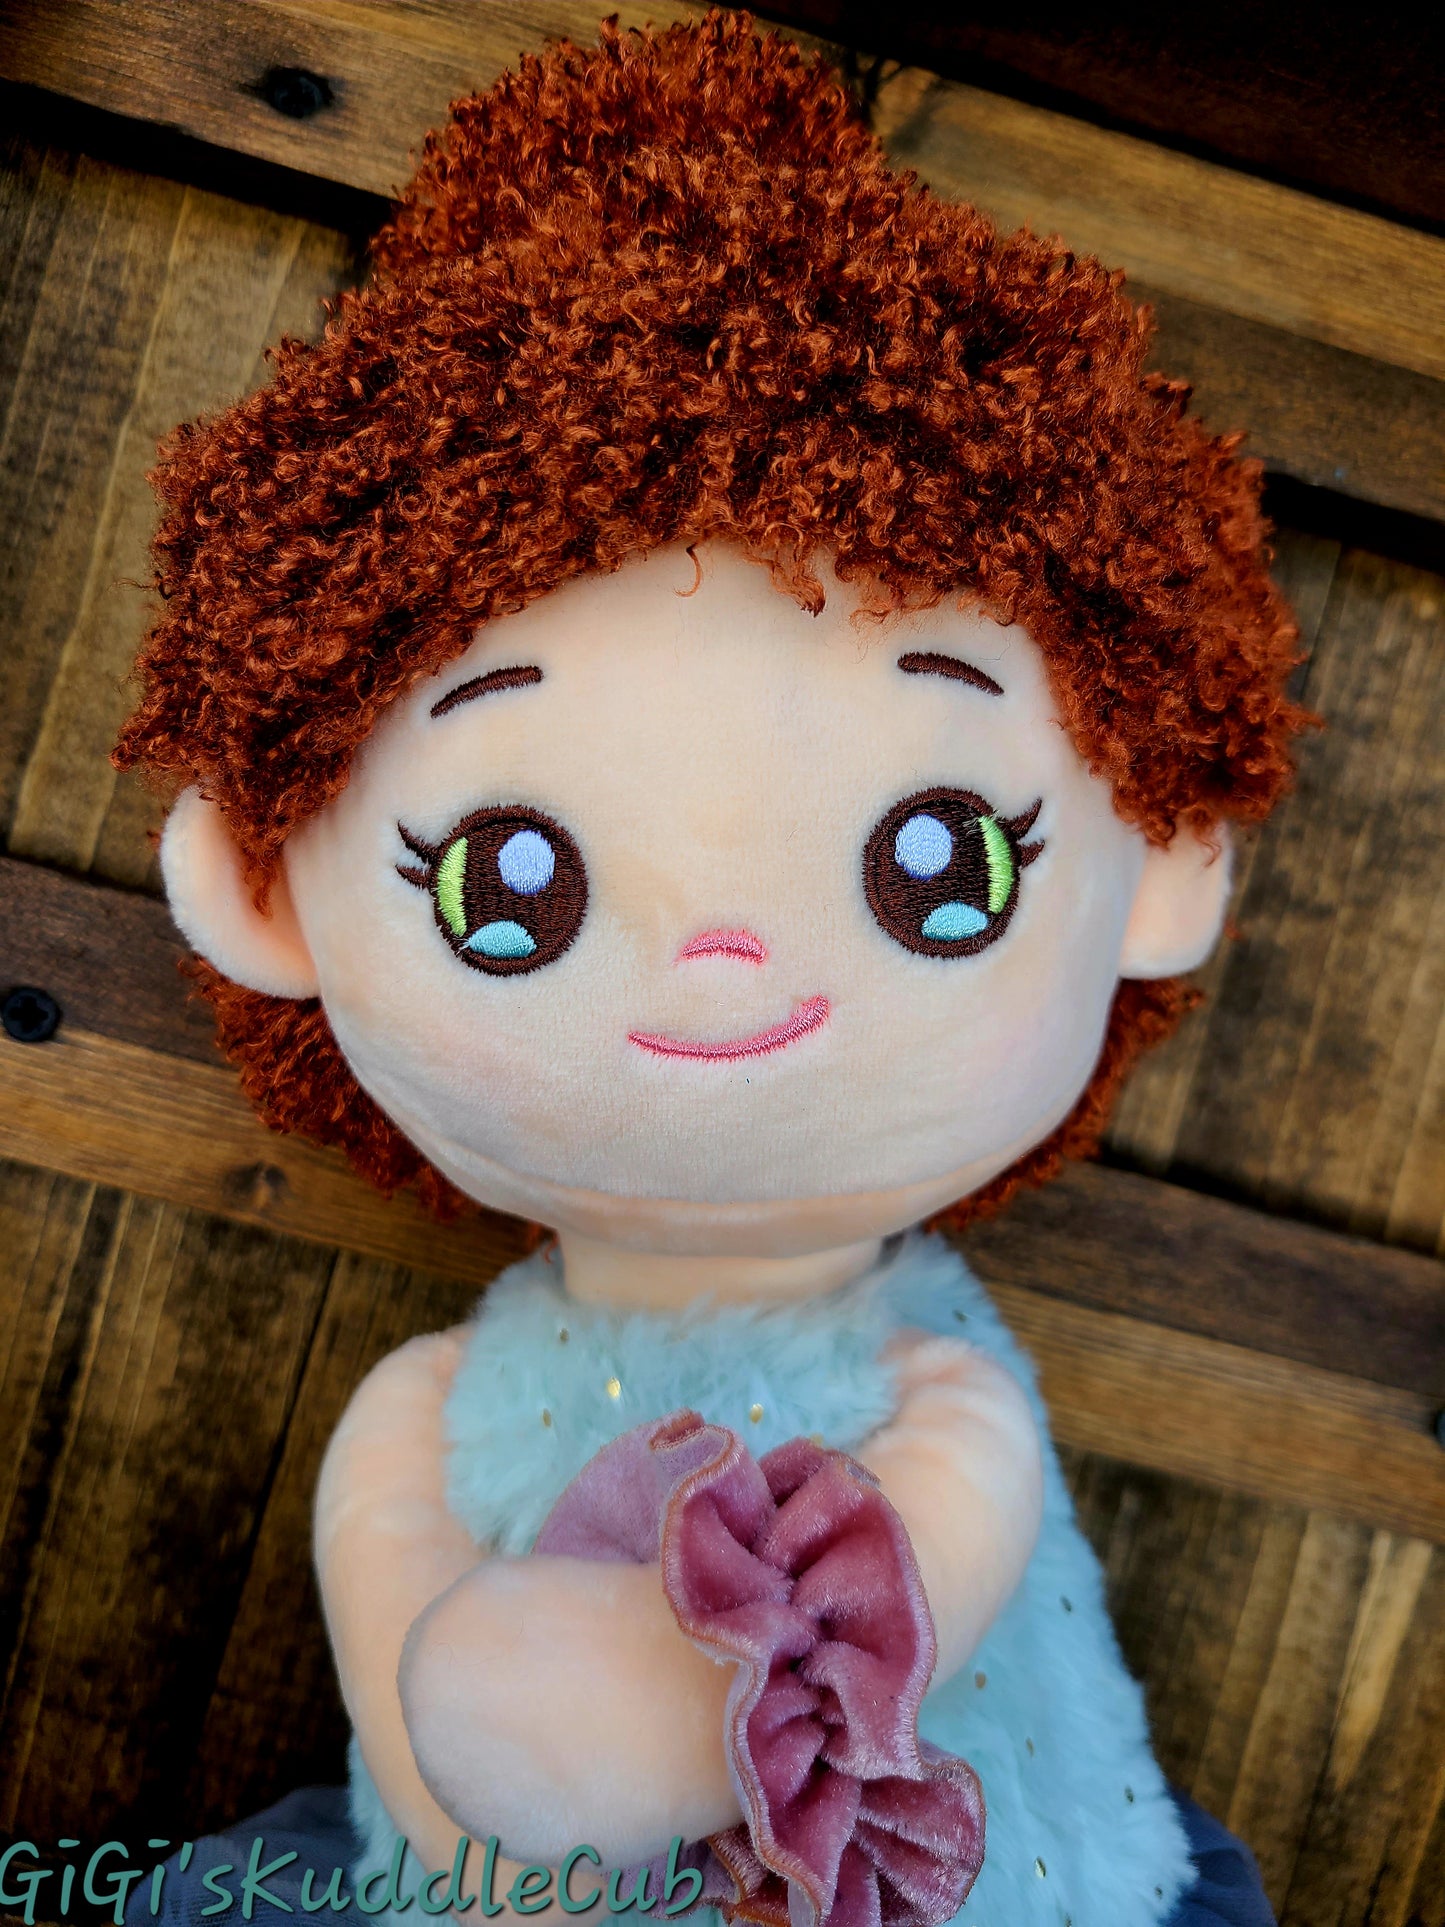 Soft Plush 15in Curly Red Hair Rag Doll Plush Toy/ Decor/Handmade Baby Gift Toy